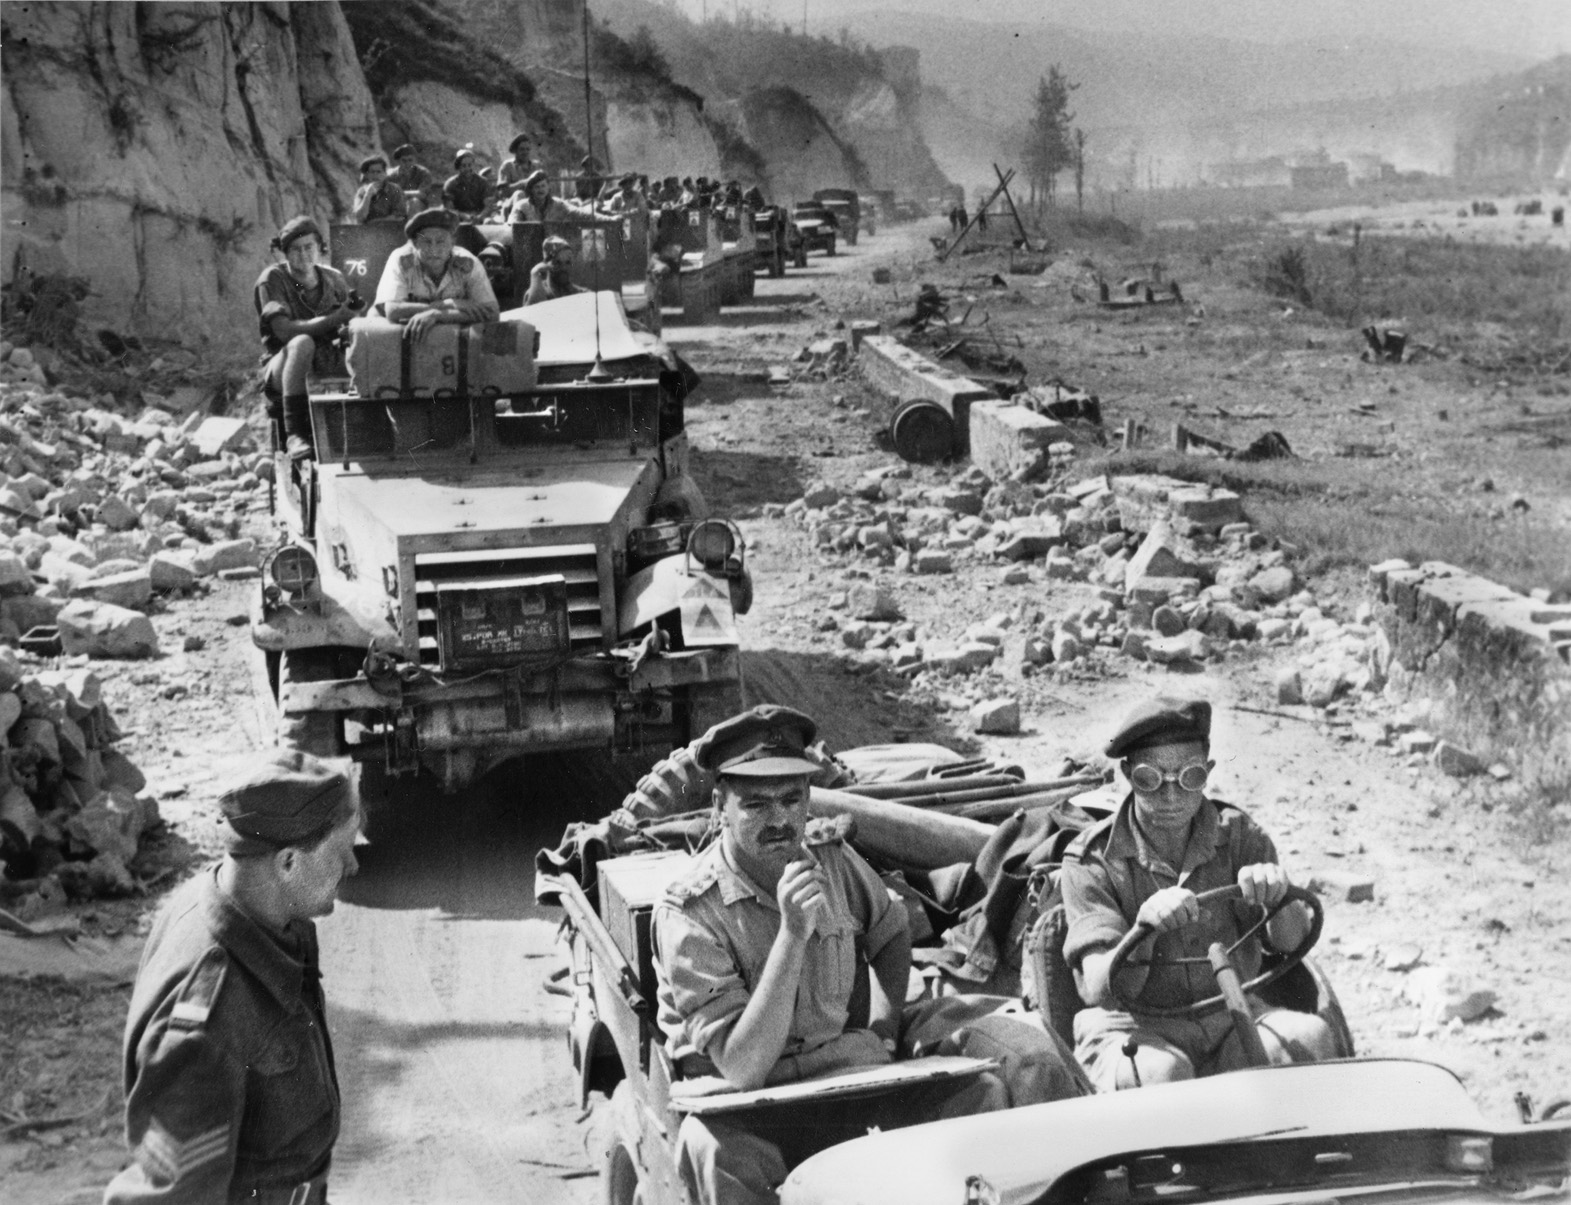 With victory in Italy less than a month away, 6th Armoured Division vehicles advance along a rubble-strewn road near Bologna, April 1945. Fighting in Italy ended on May 2, 1945. 